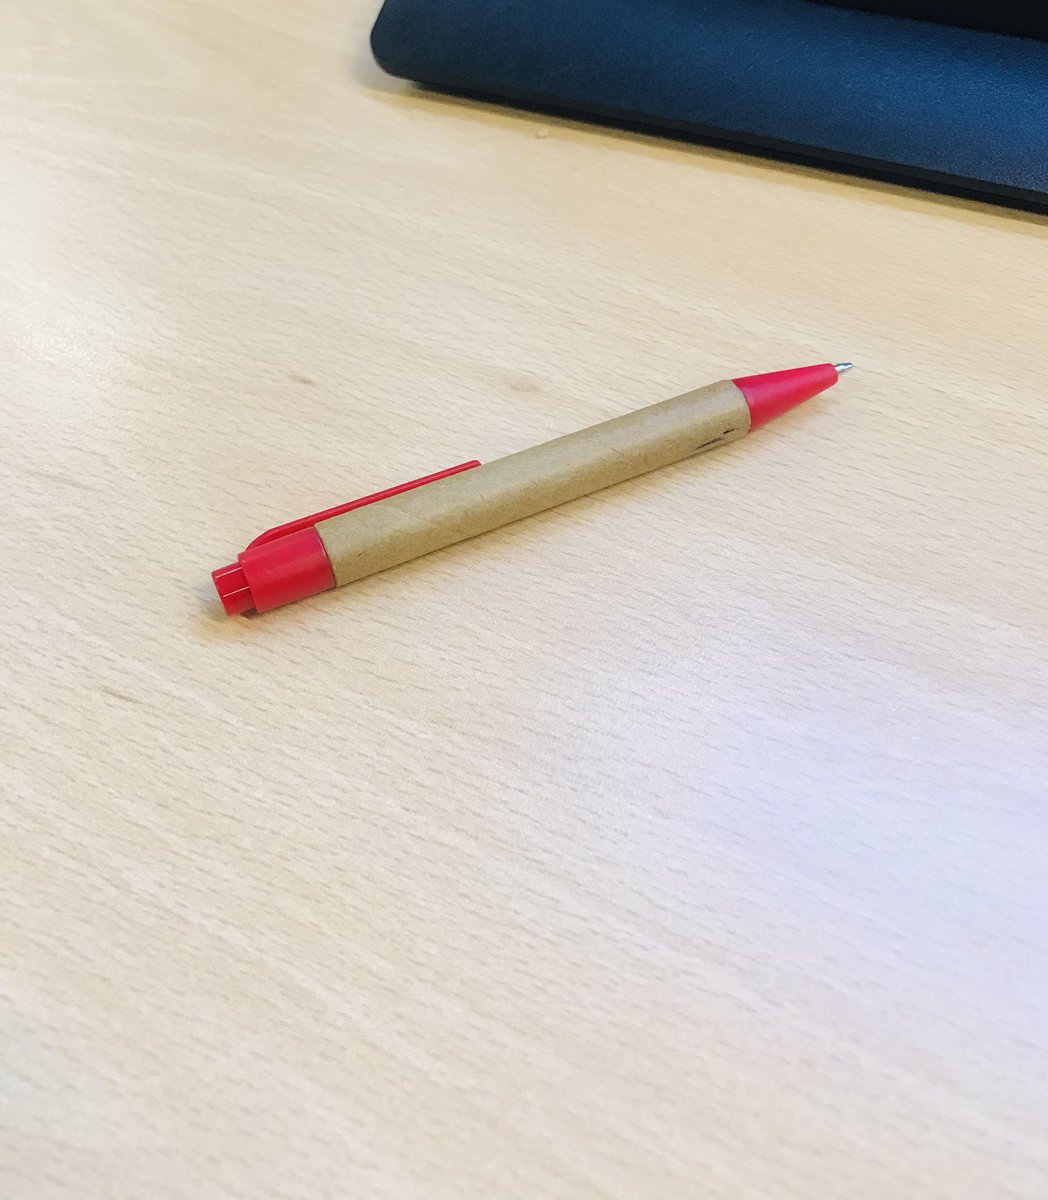 Can you use a pen as short as this???😂

#sdg4
#qualityeducationforall